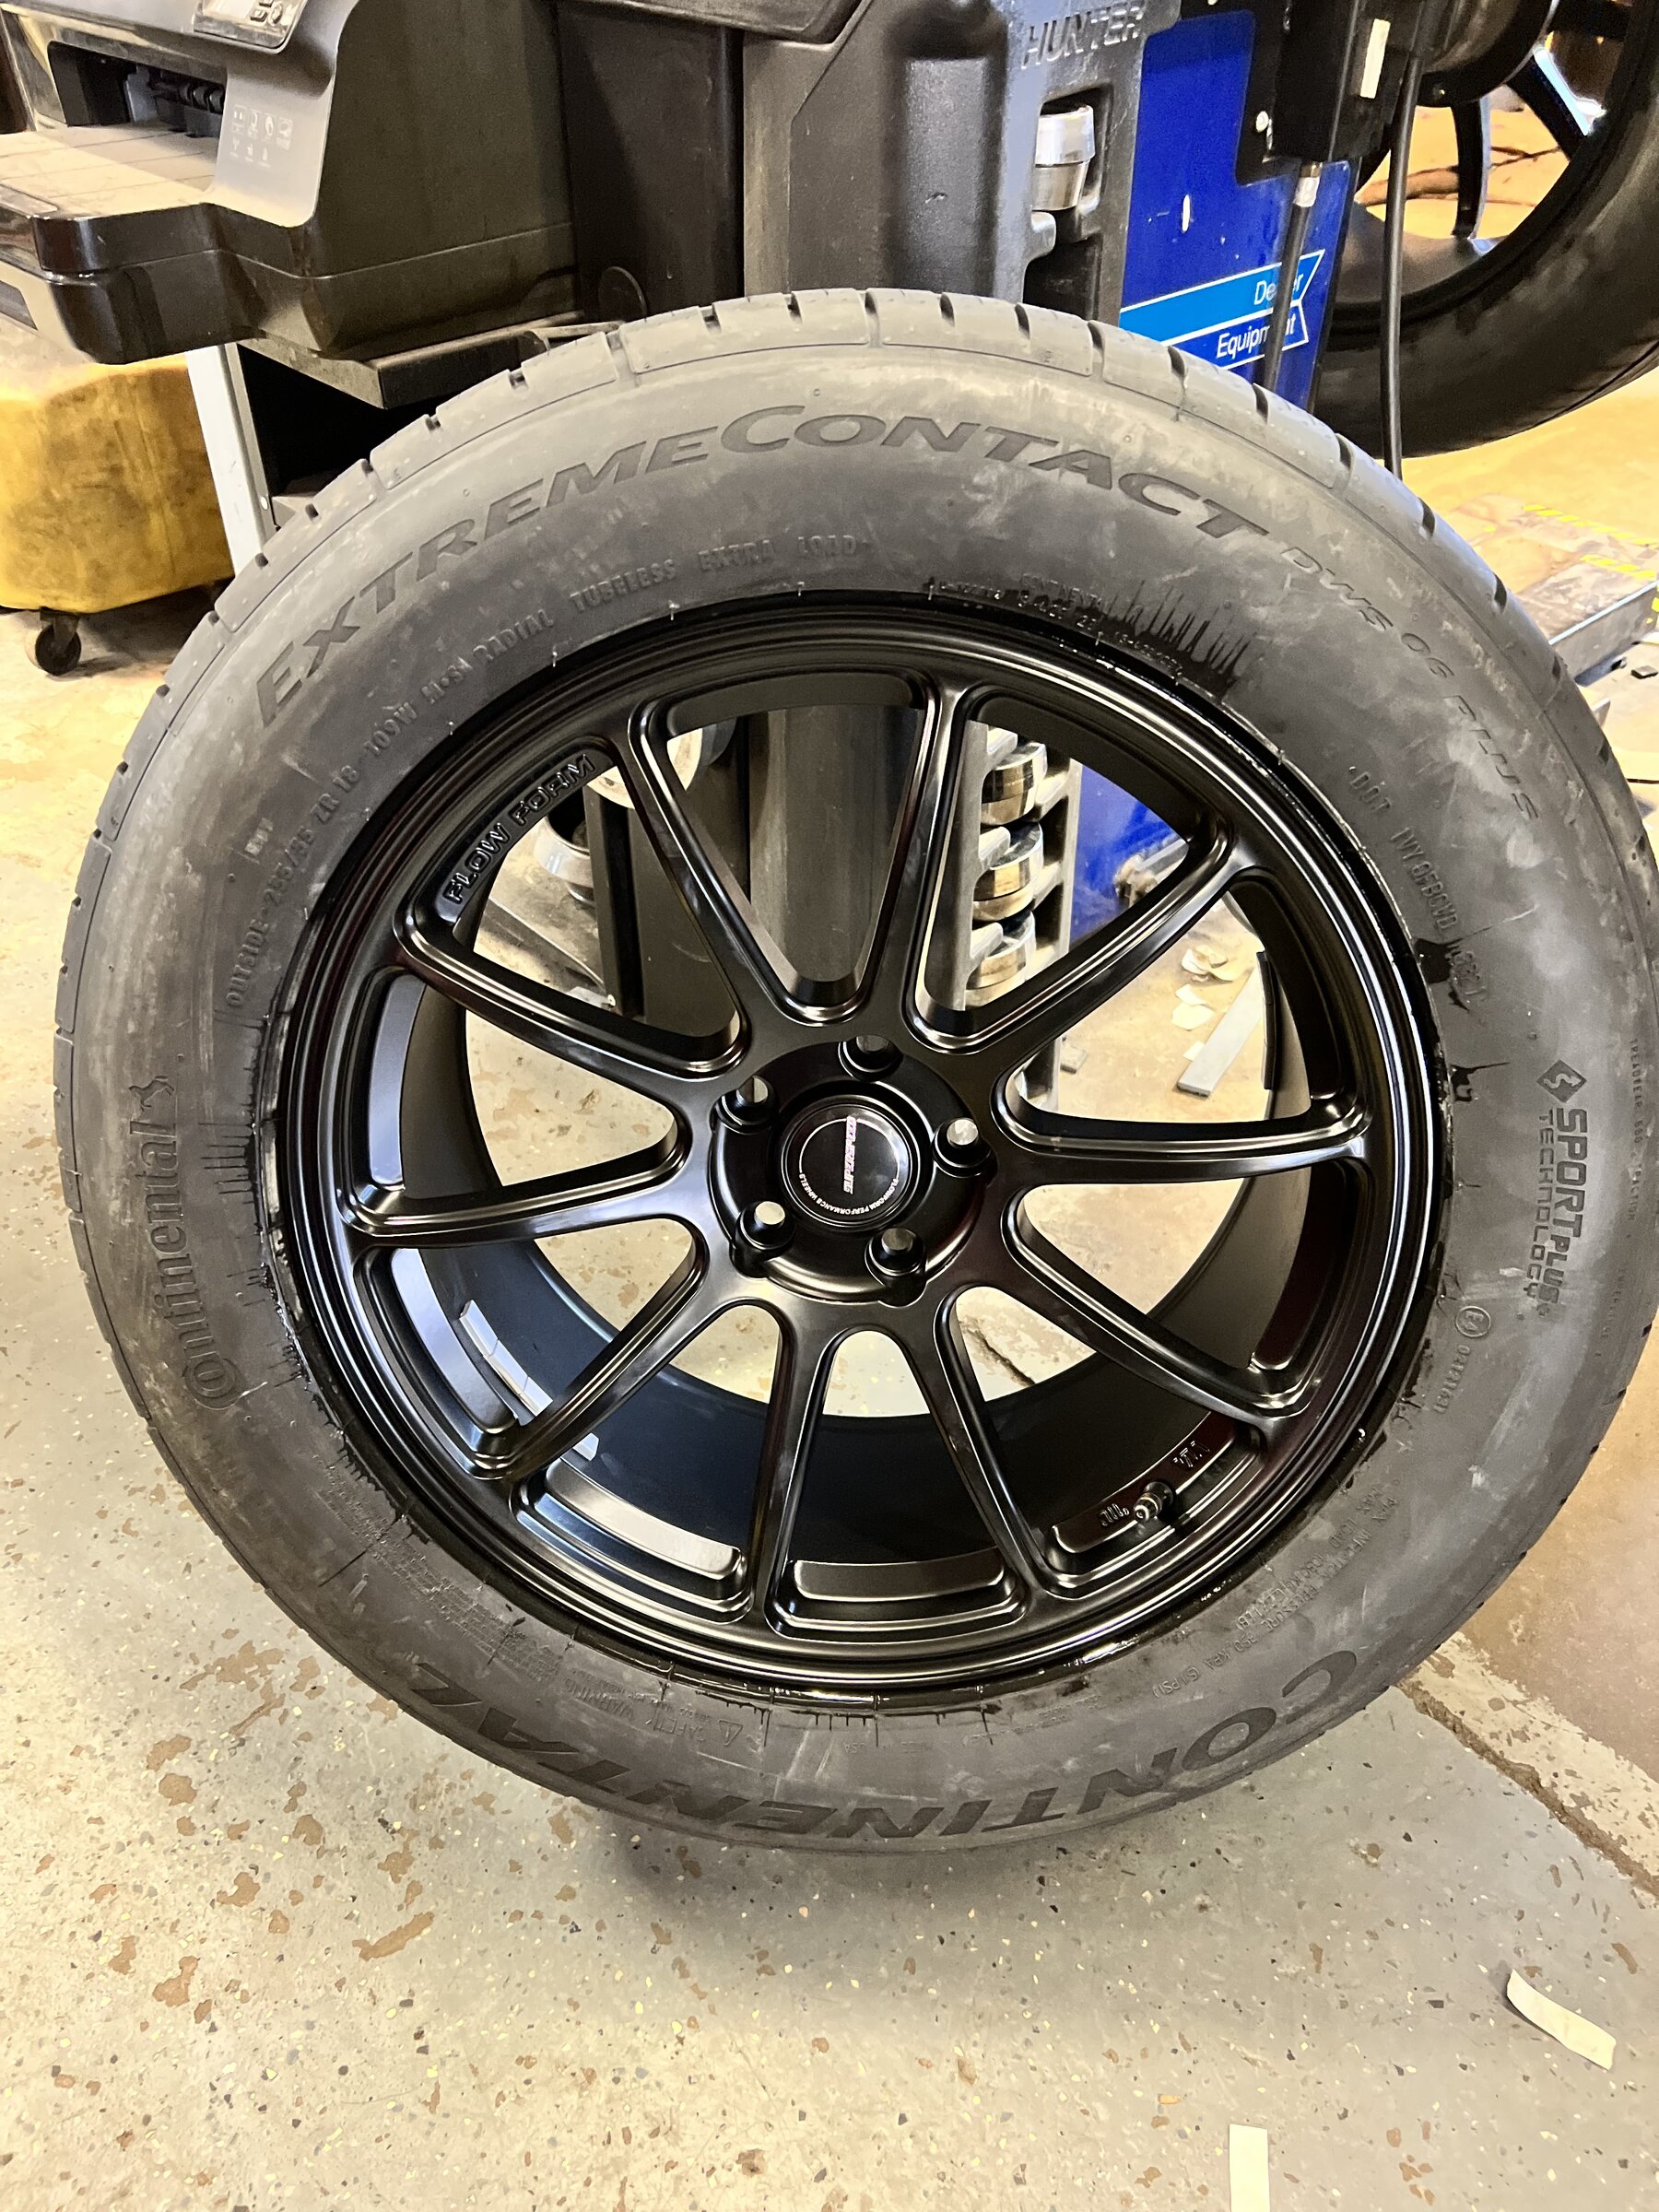 Ford Maverick Aftermarket / Custom Wheels and Tire Information and Pictures (on Ford Maverick) 7fc84ccb-99de-4502-9b99-226d8f300c4b-jpe